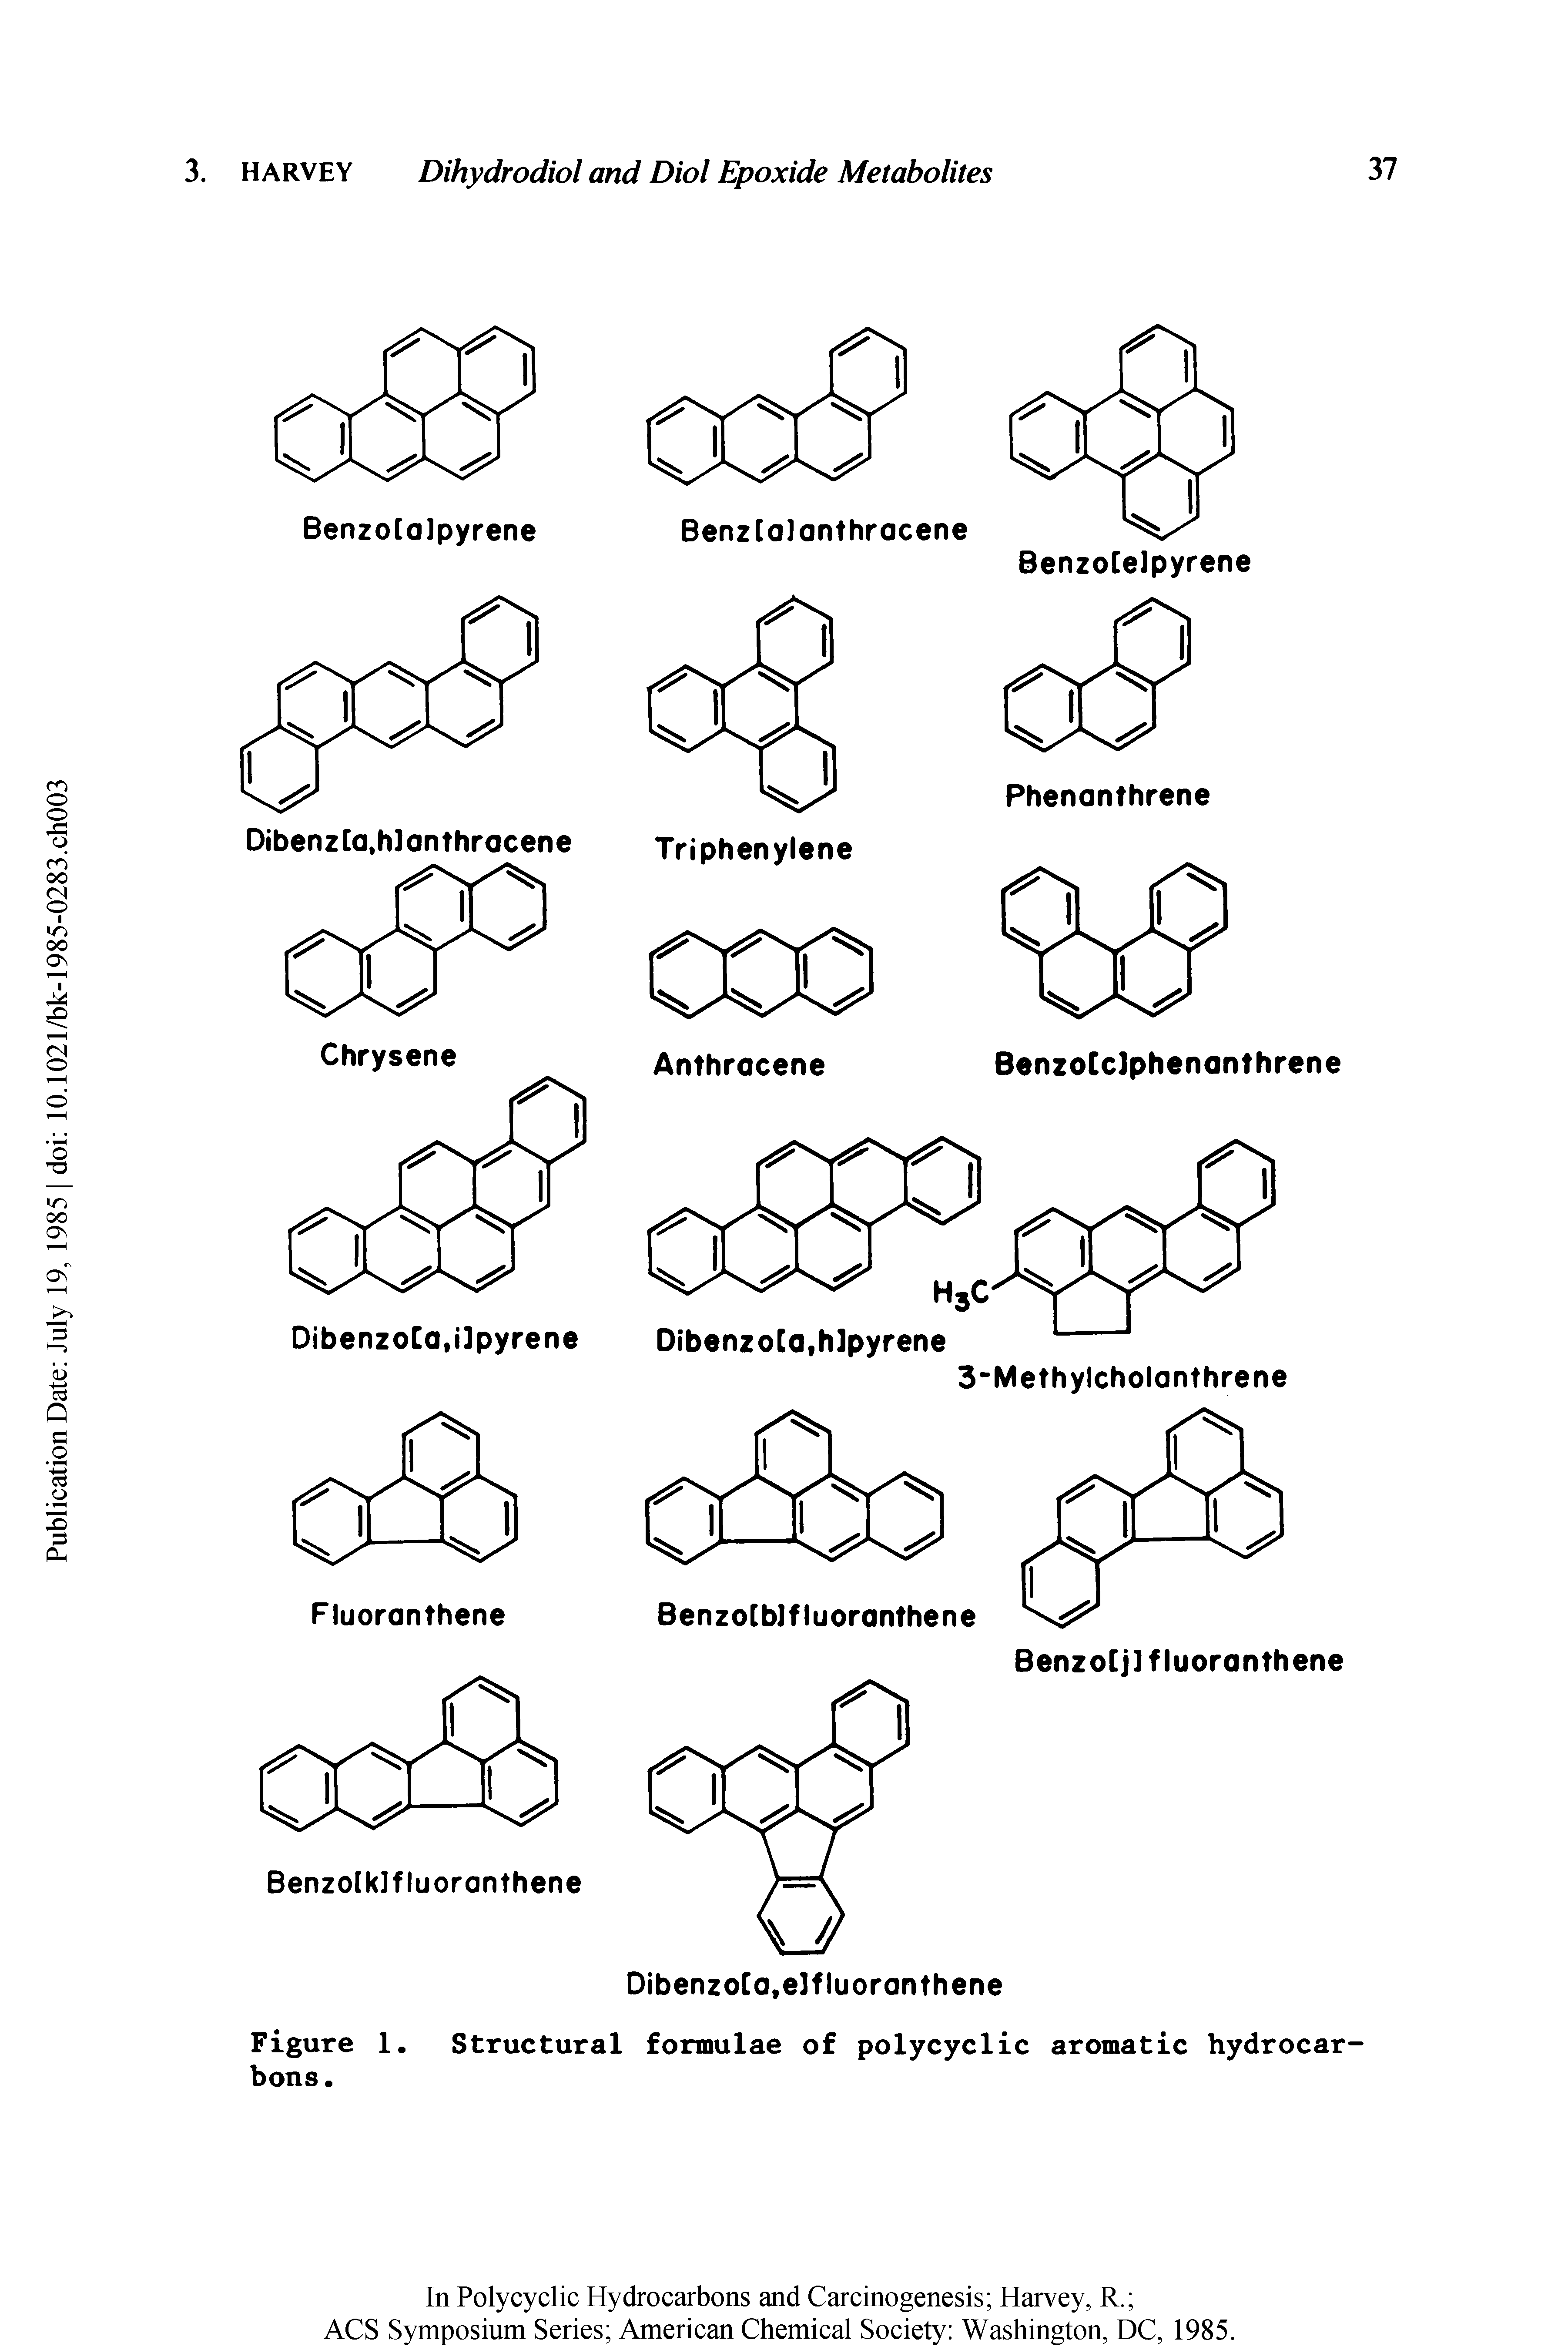 Figure 1. Structural formulae of polycyclic aromatic hydrocarbons.